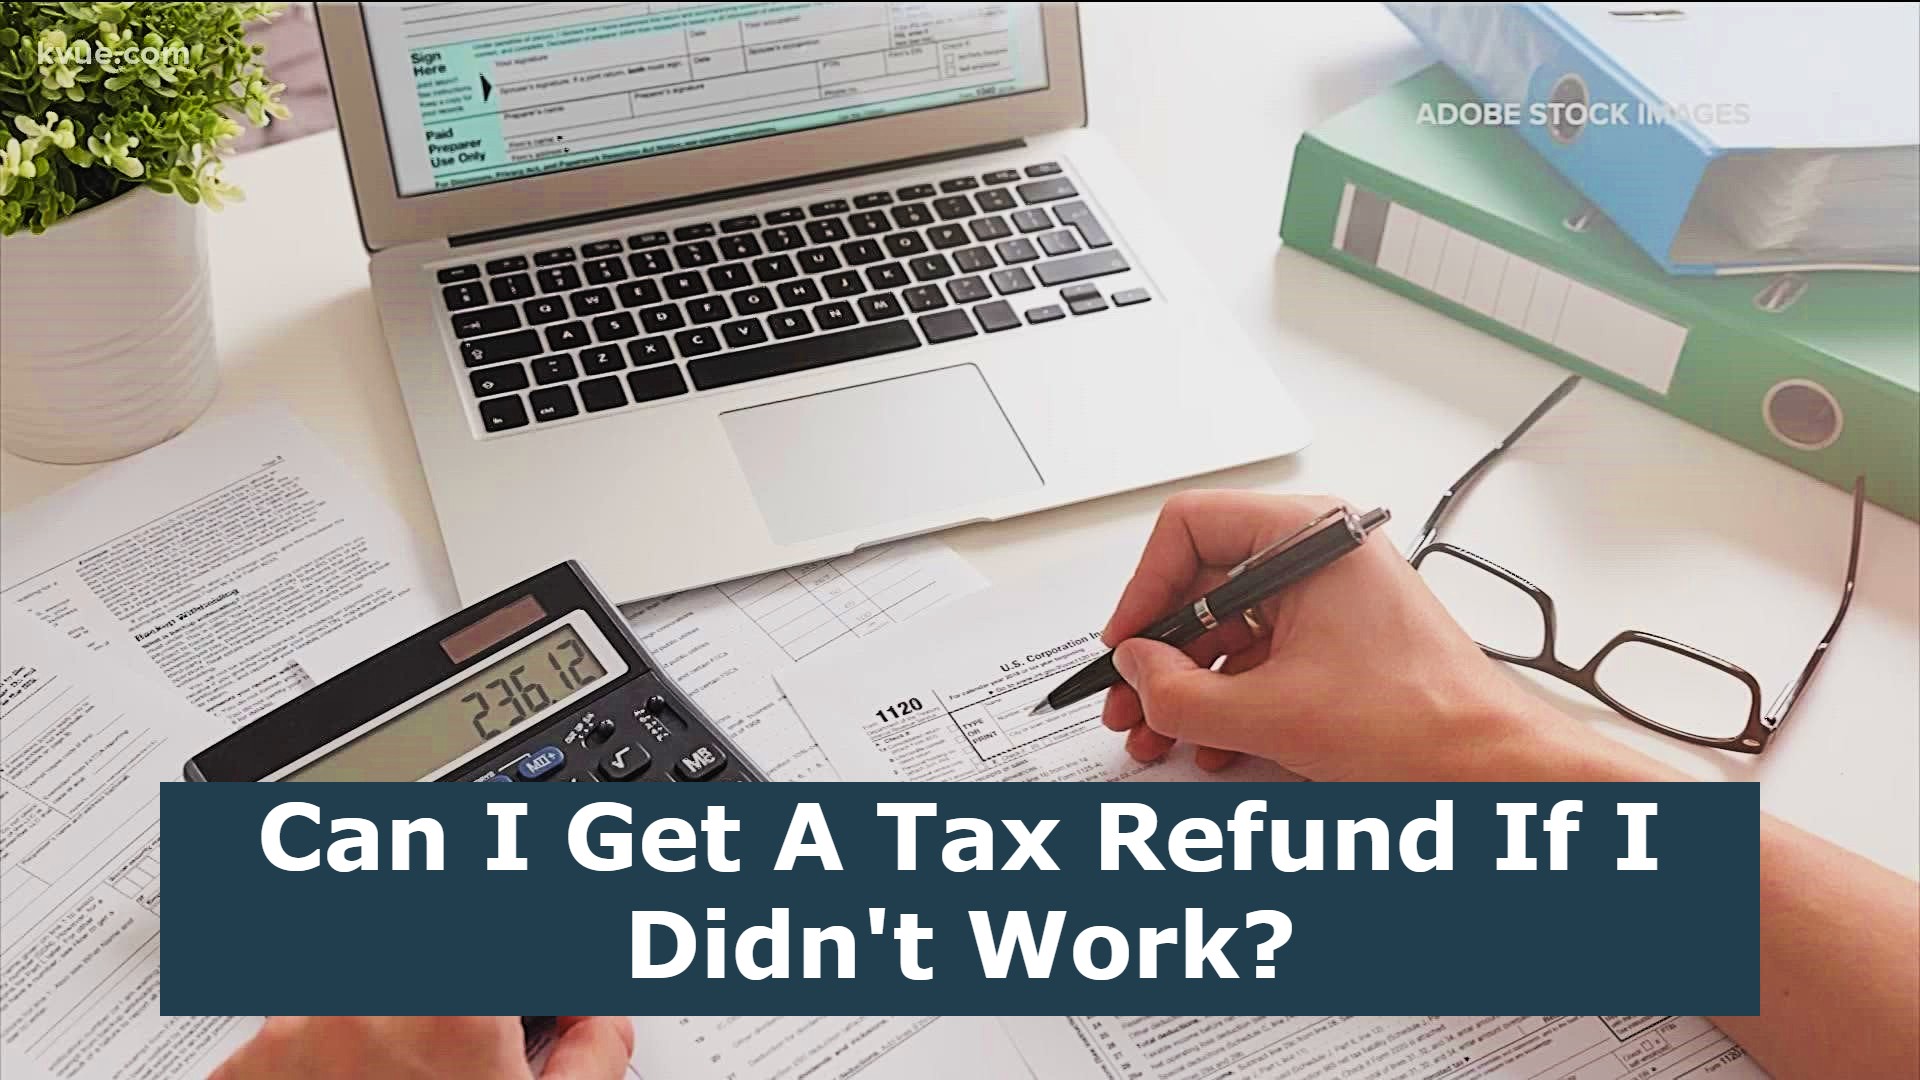 Can I Get A Tax Refund If I Didn't Work?